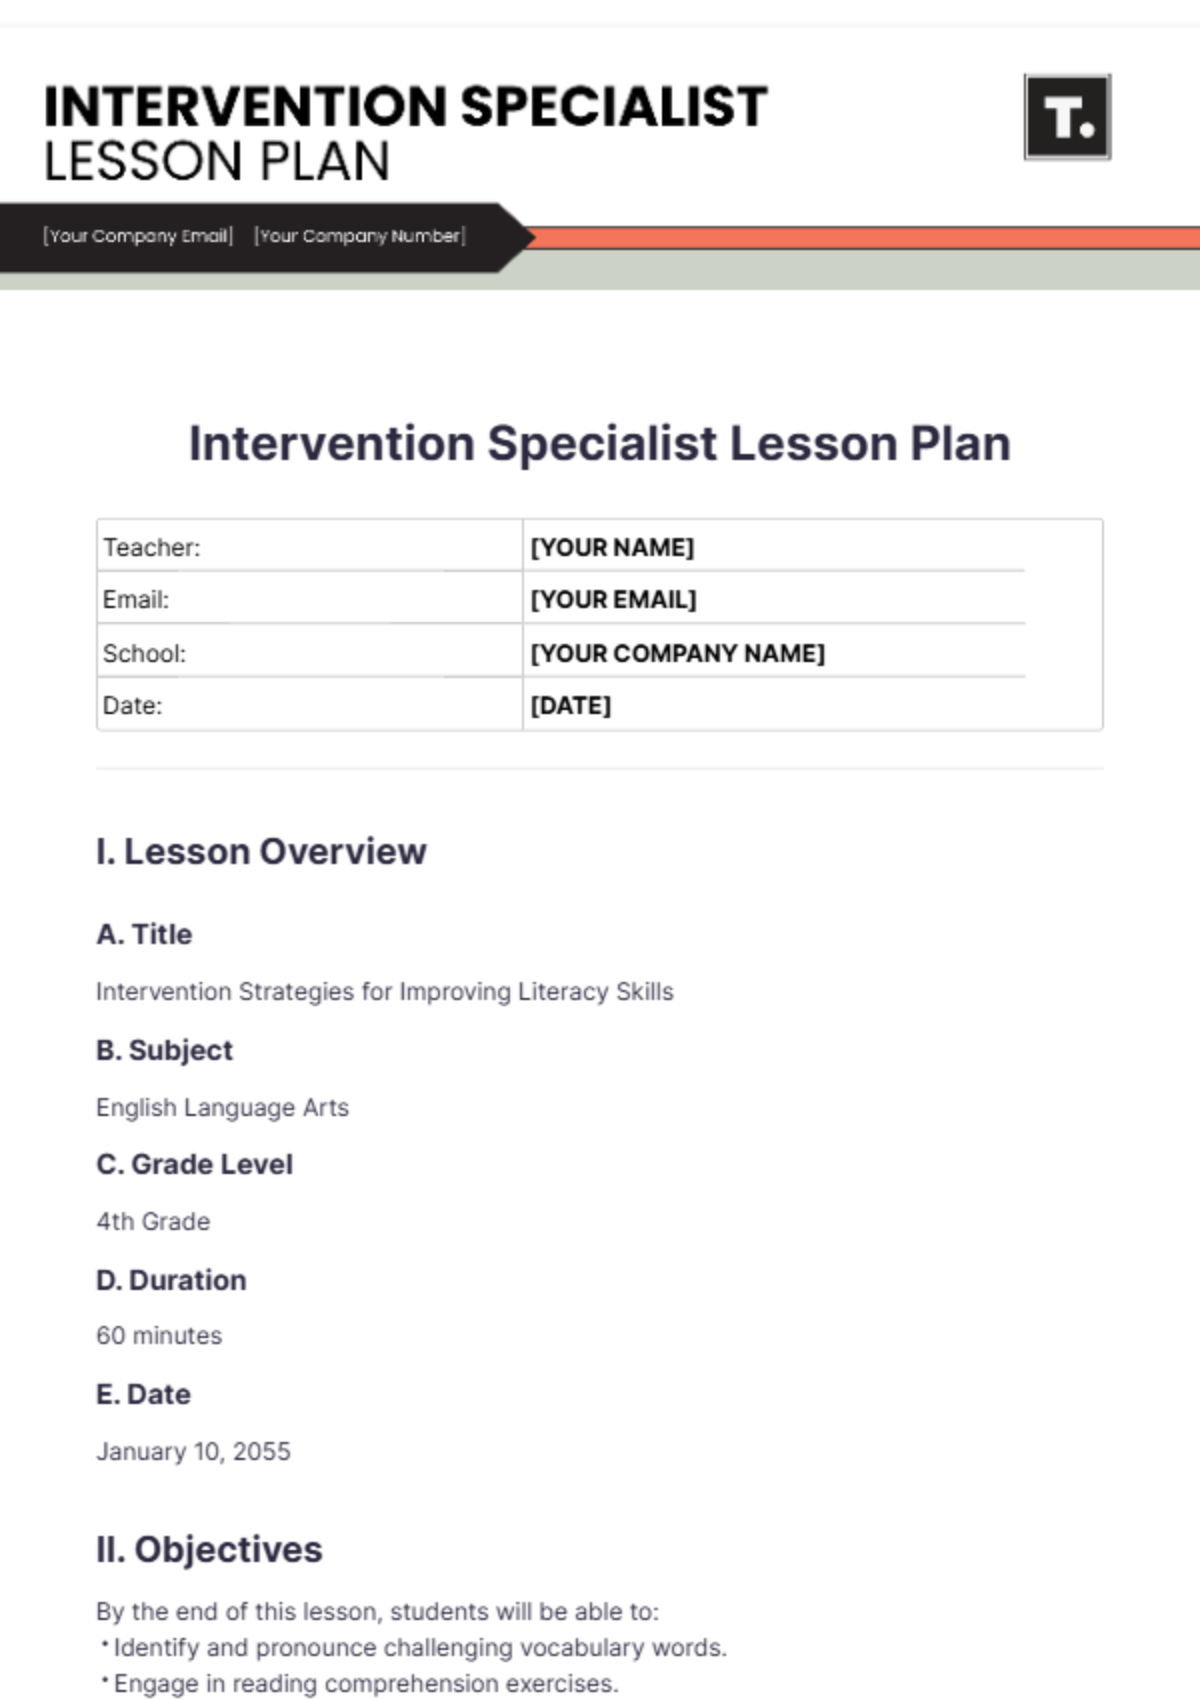 Free Intervention Specialist Lesson Plan Template